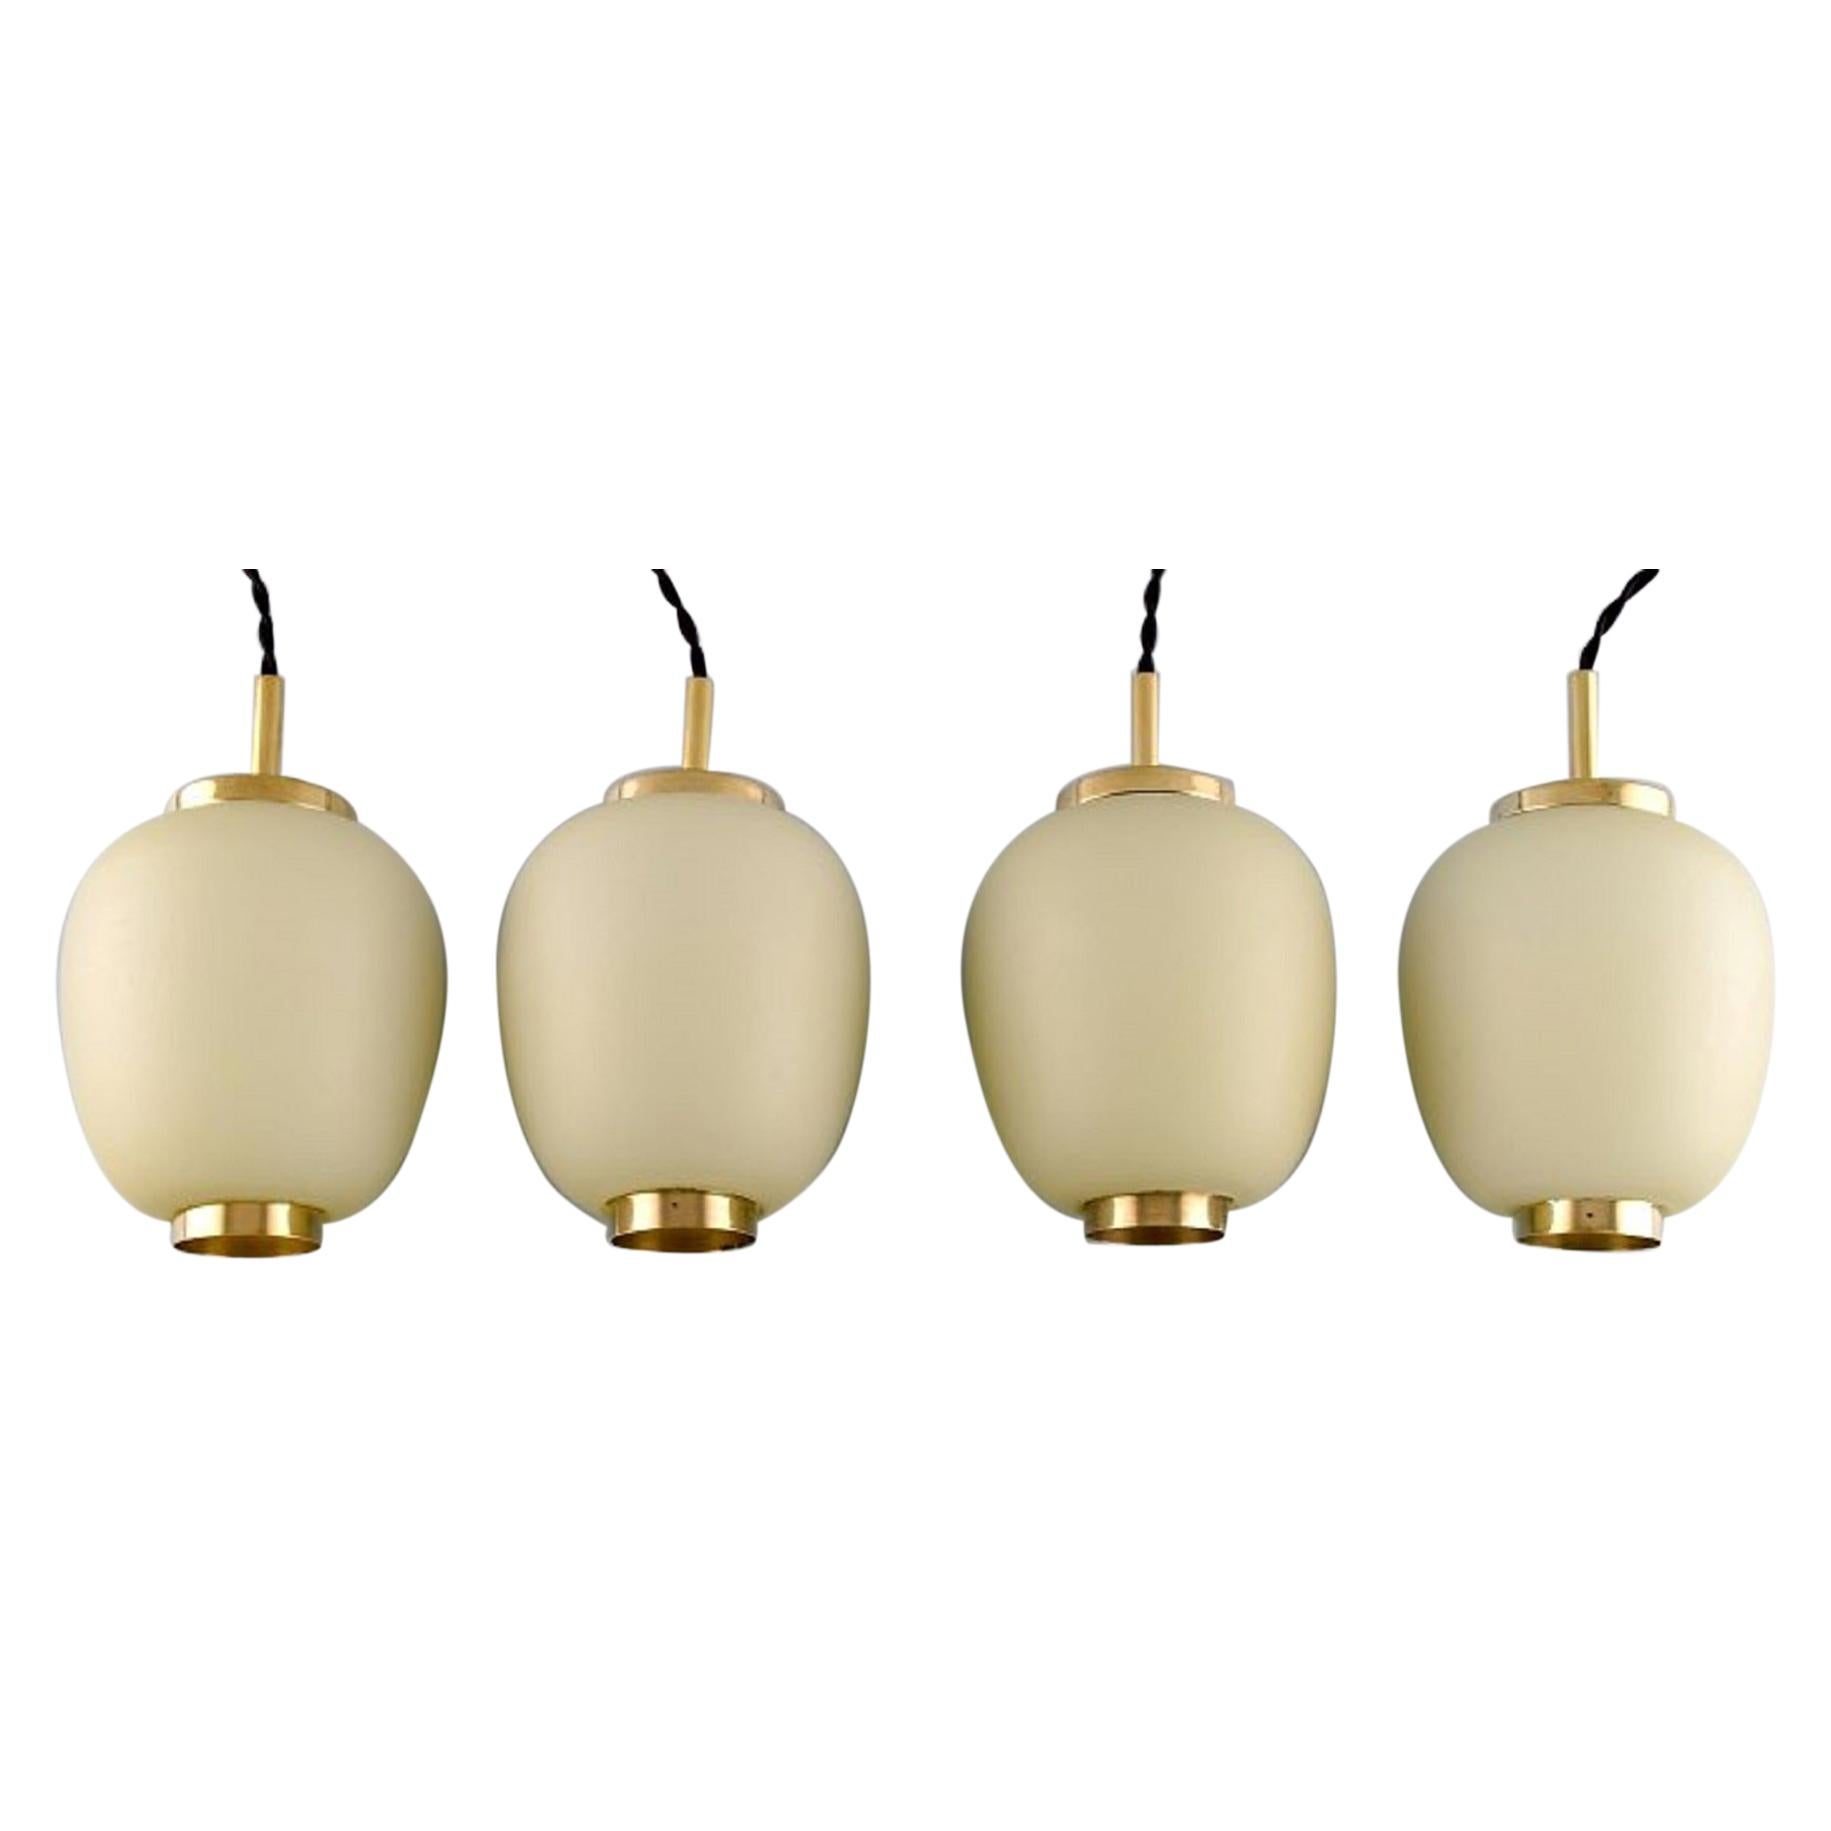 Danish Design, Four China Lamps or Pendants Made of Matt Opal Glass, 1960s For Sale